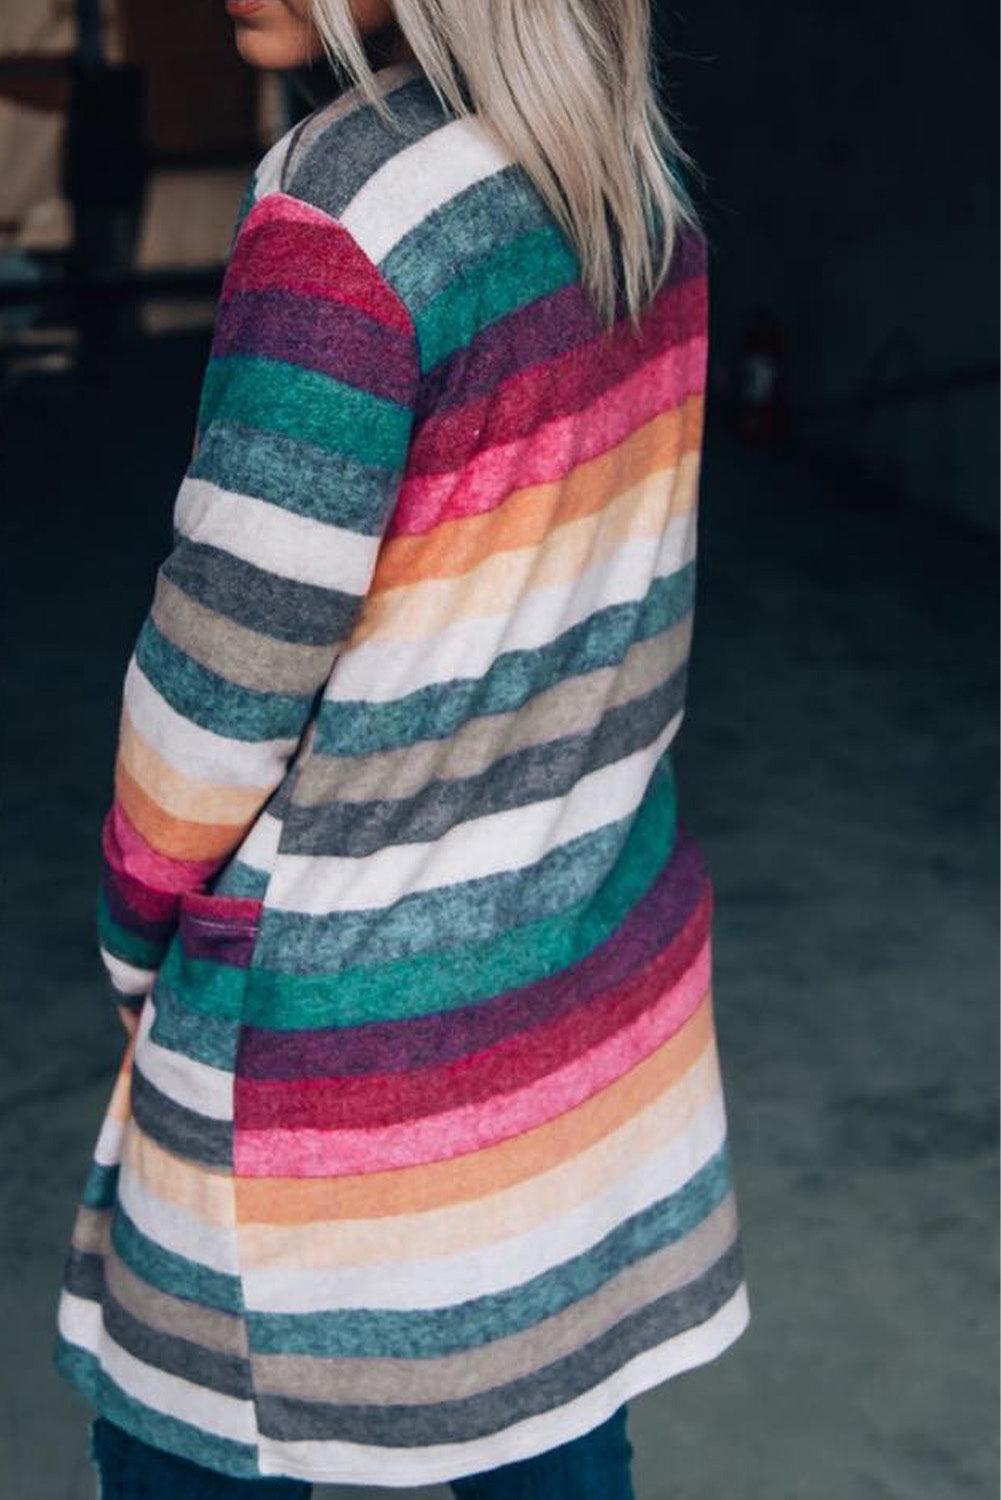 Multicolor Striped Print Long Sleeve Open Front Long Cardigan - L & M Kee, LLC